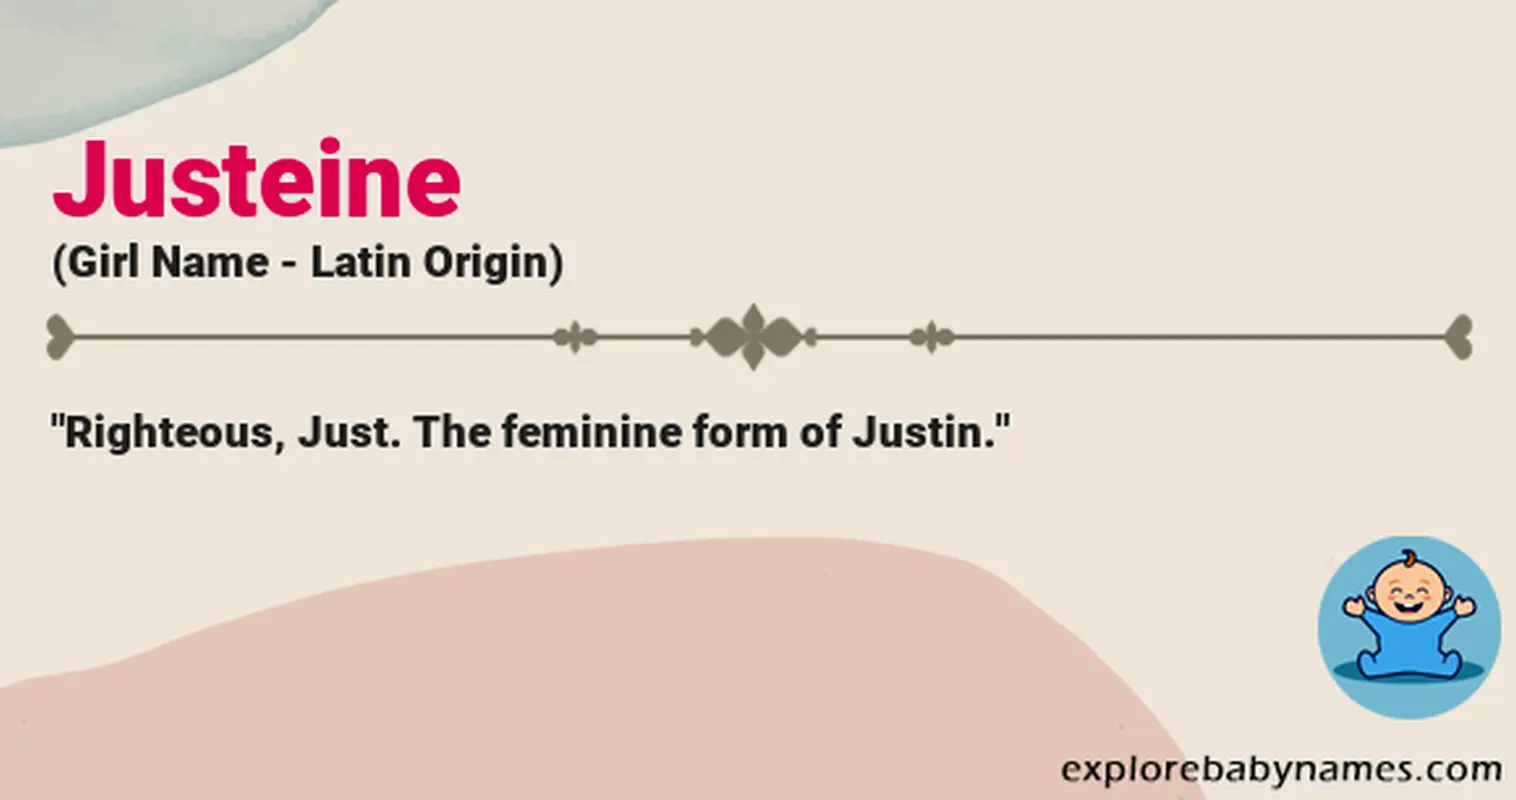 Meaning of Justeine